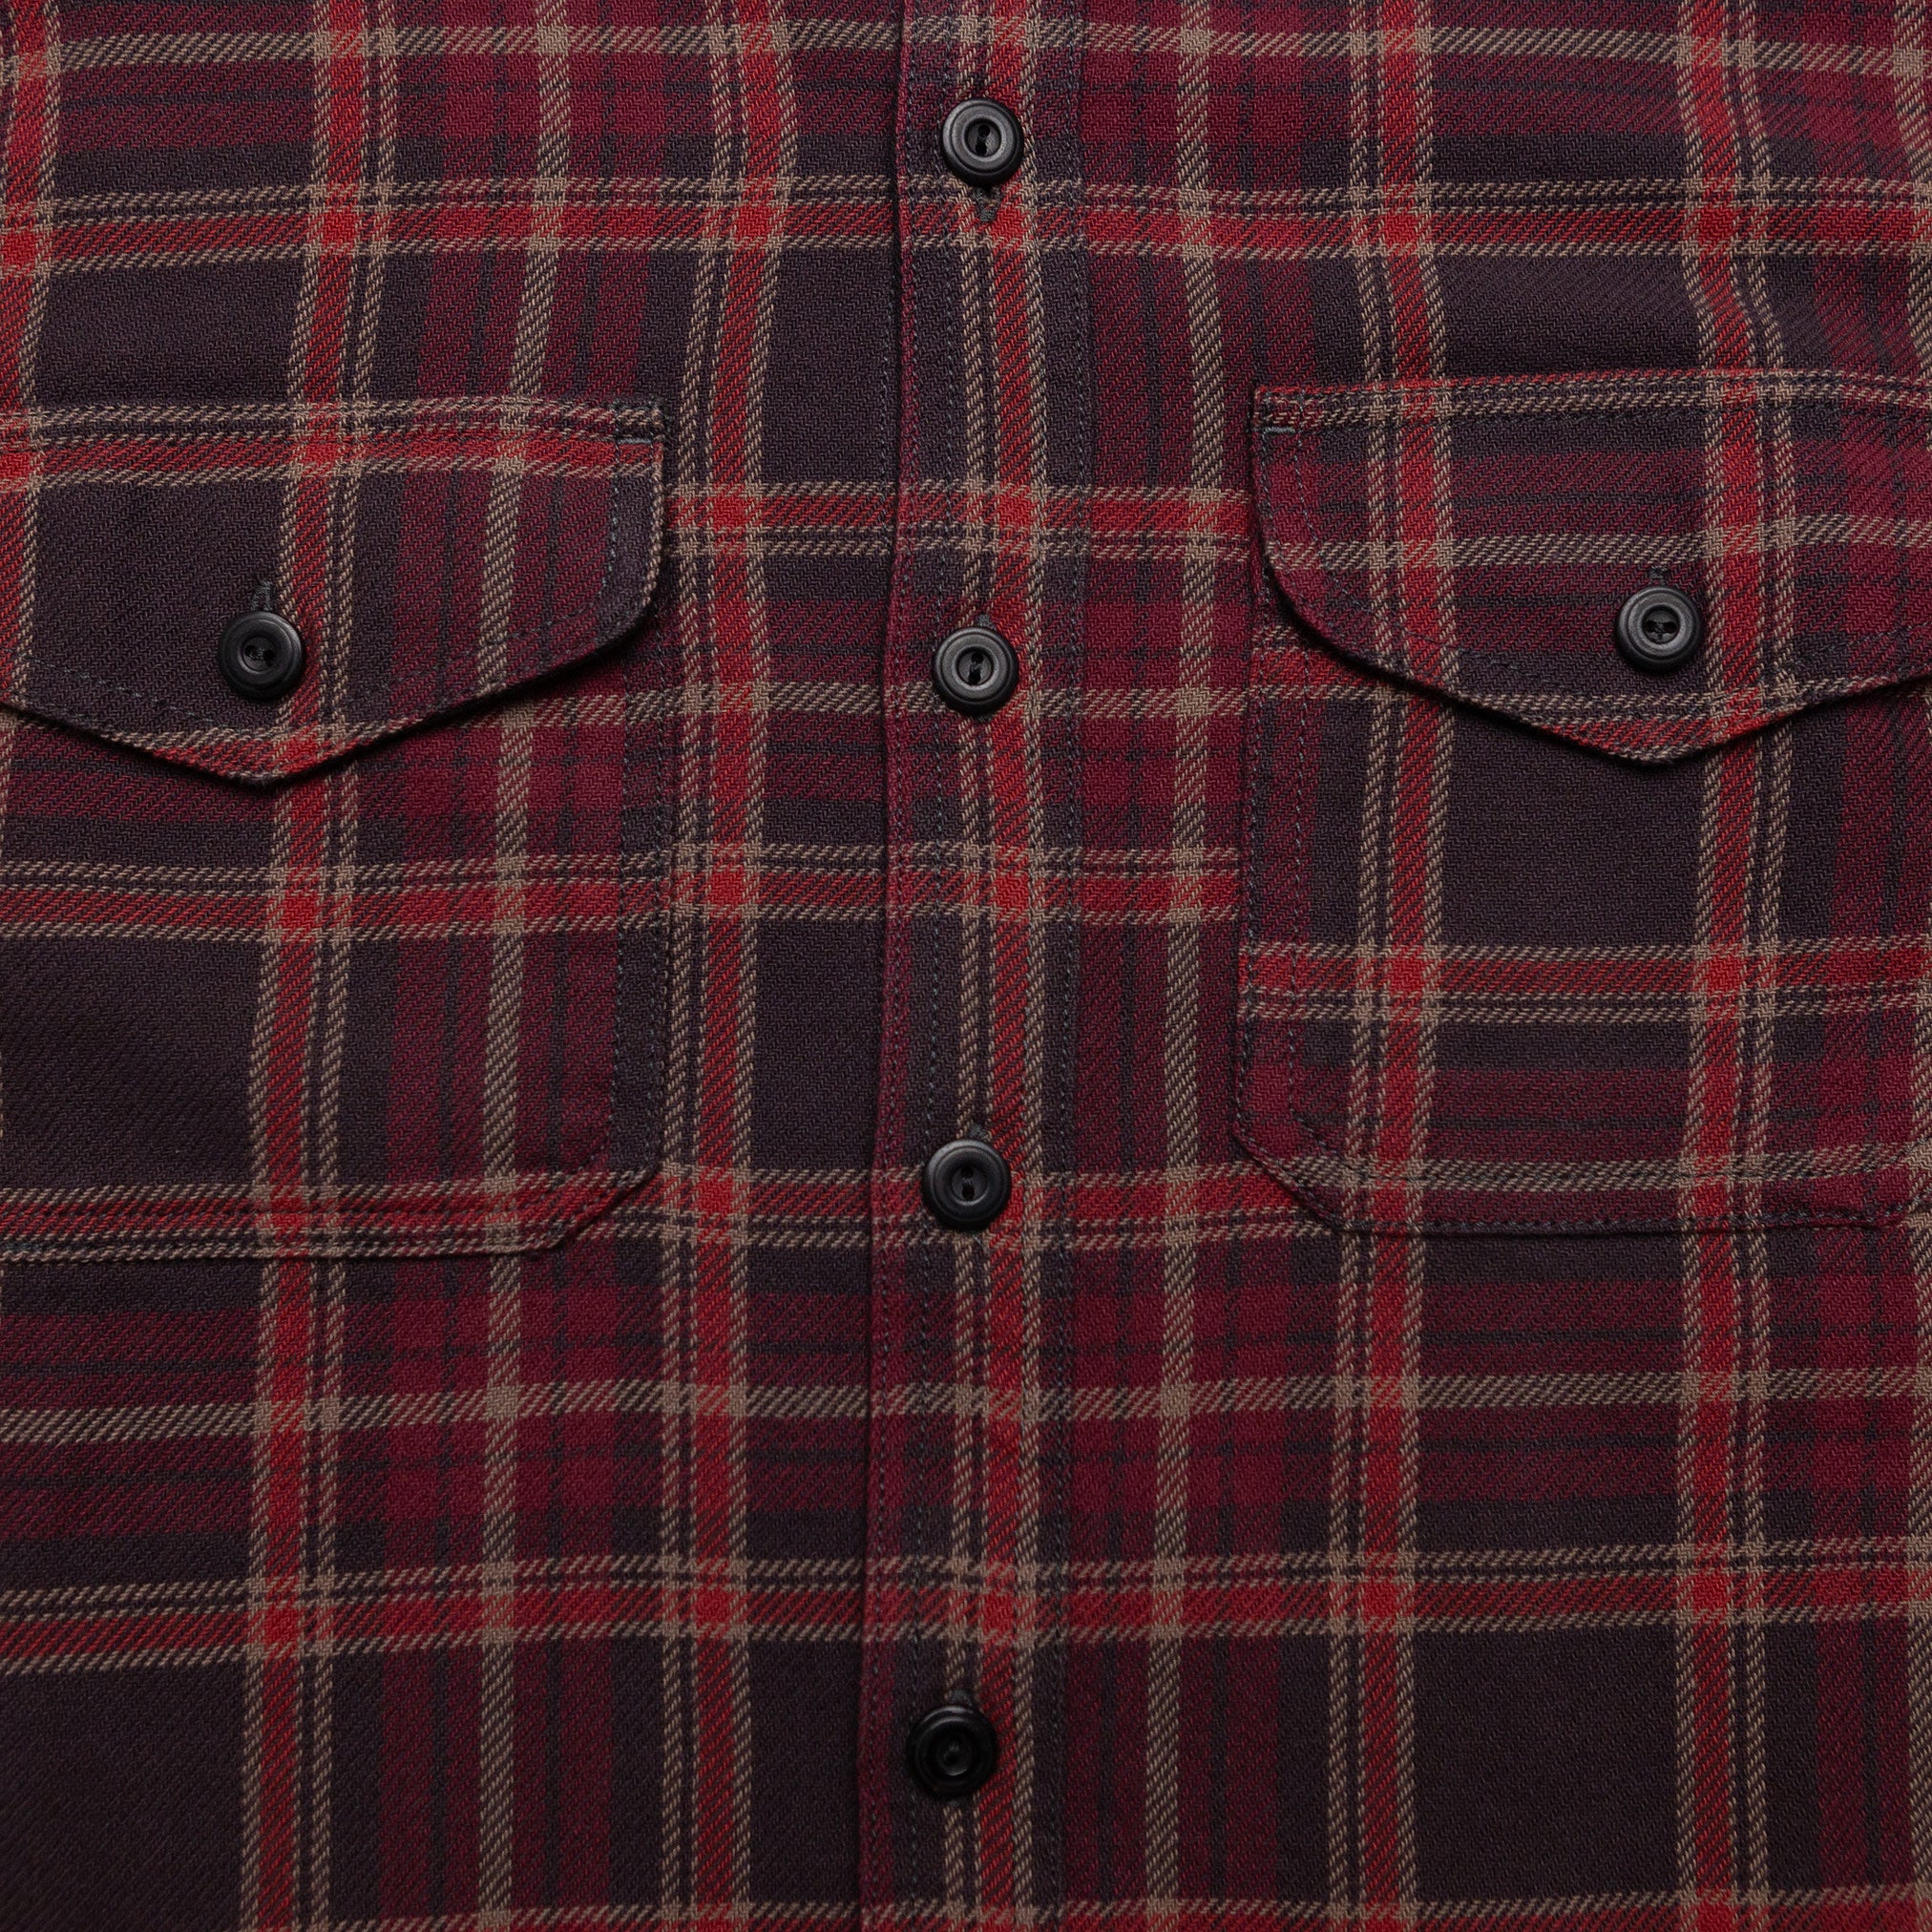 The Utility Shirt in Deep Red Plaid